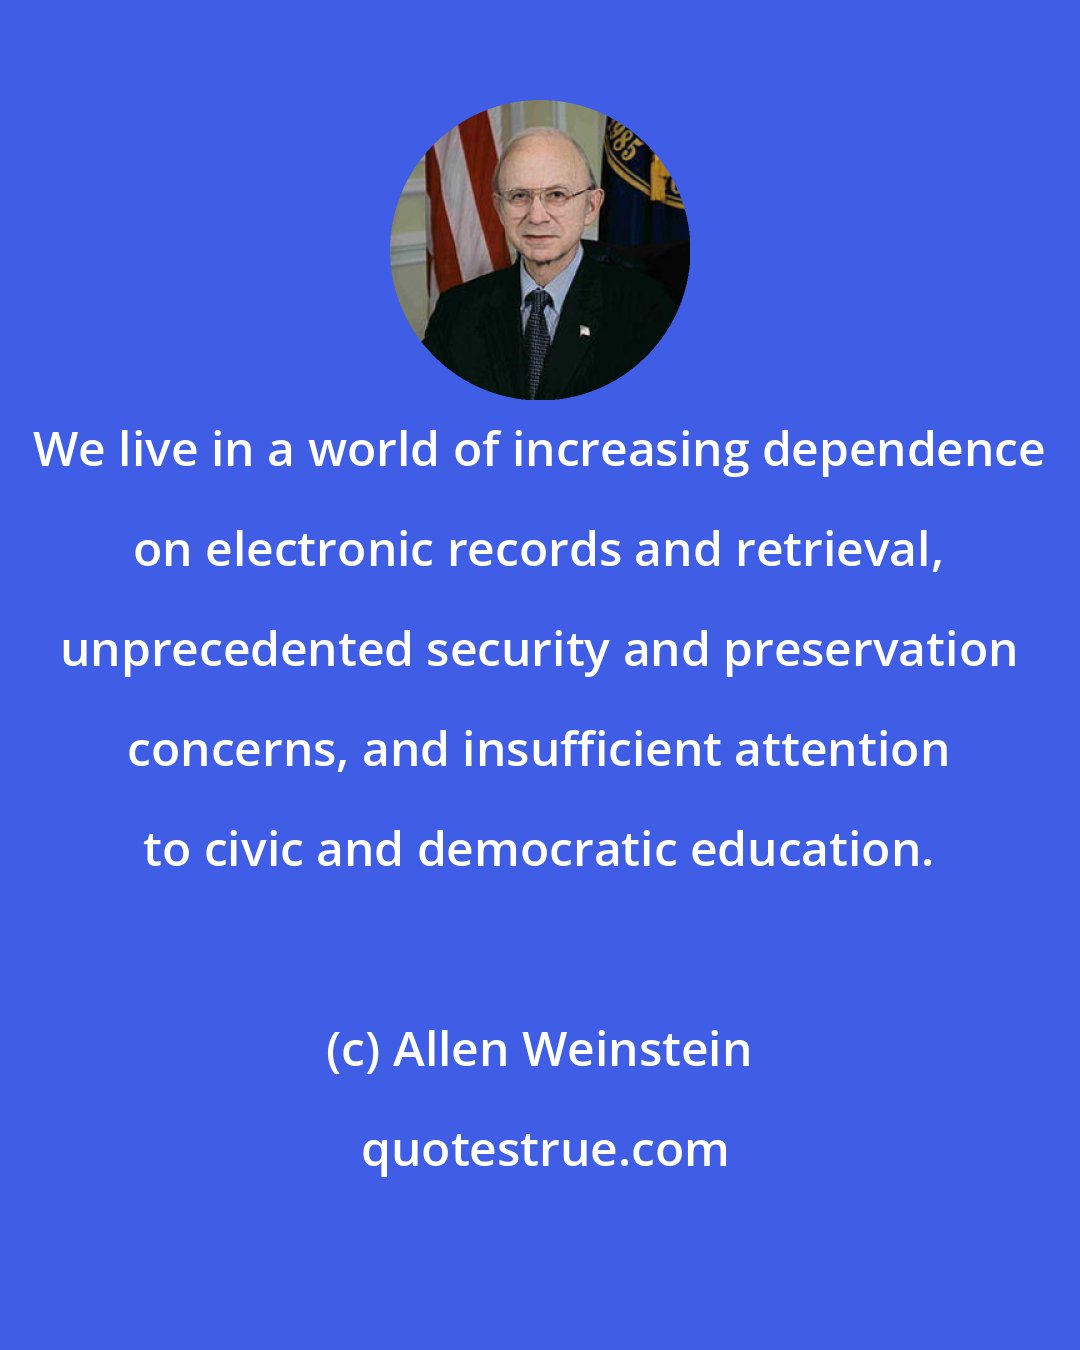 Allen Weinstein: We live in a world of increasing dependence on electronic records and retrieval, unprecedented security and preservation concerns, and insufficient attention to civic and democratic education.